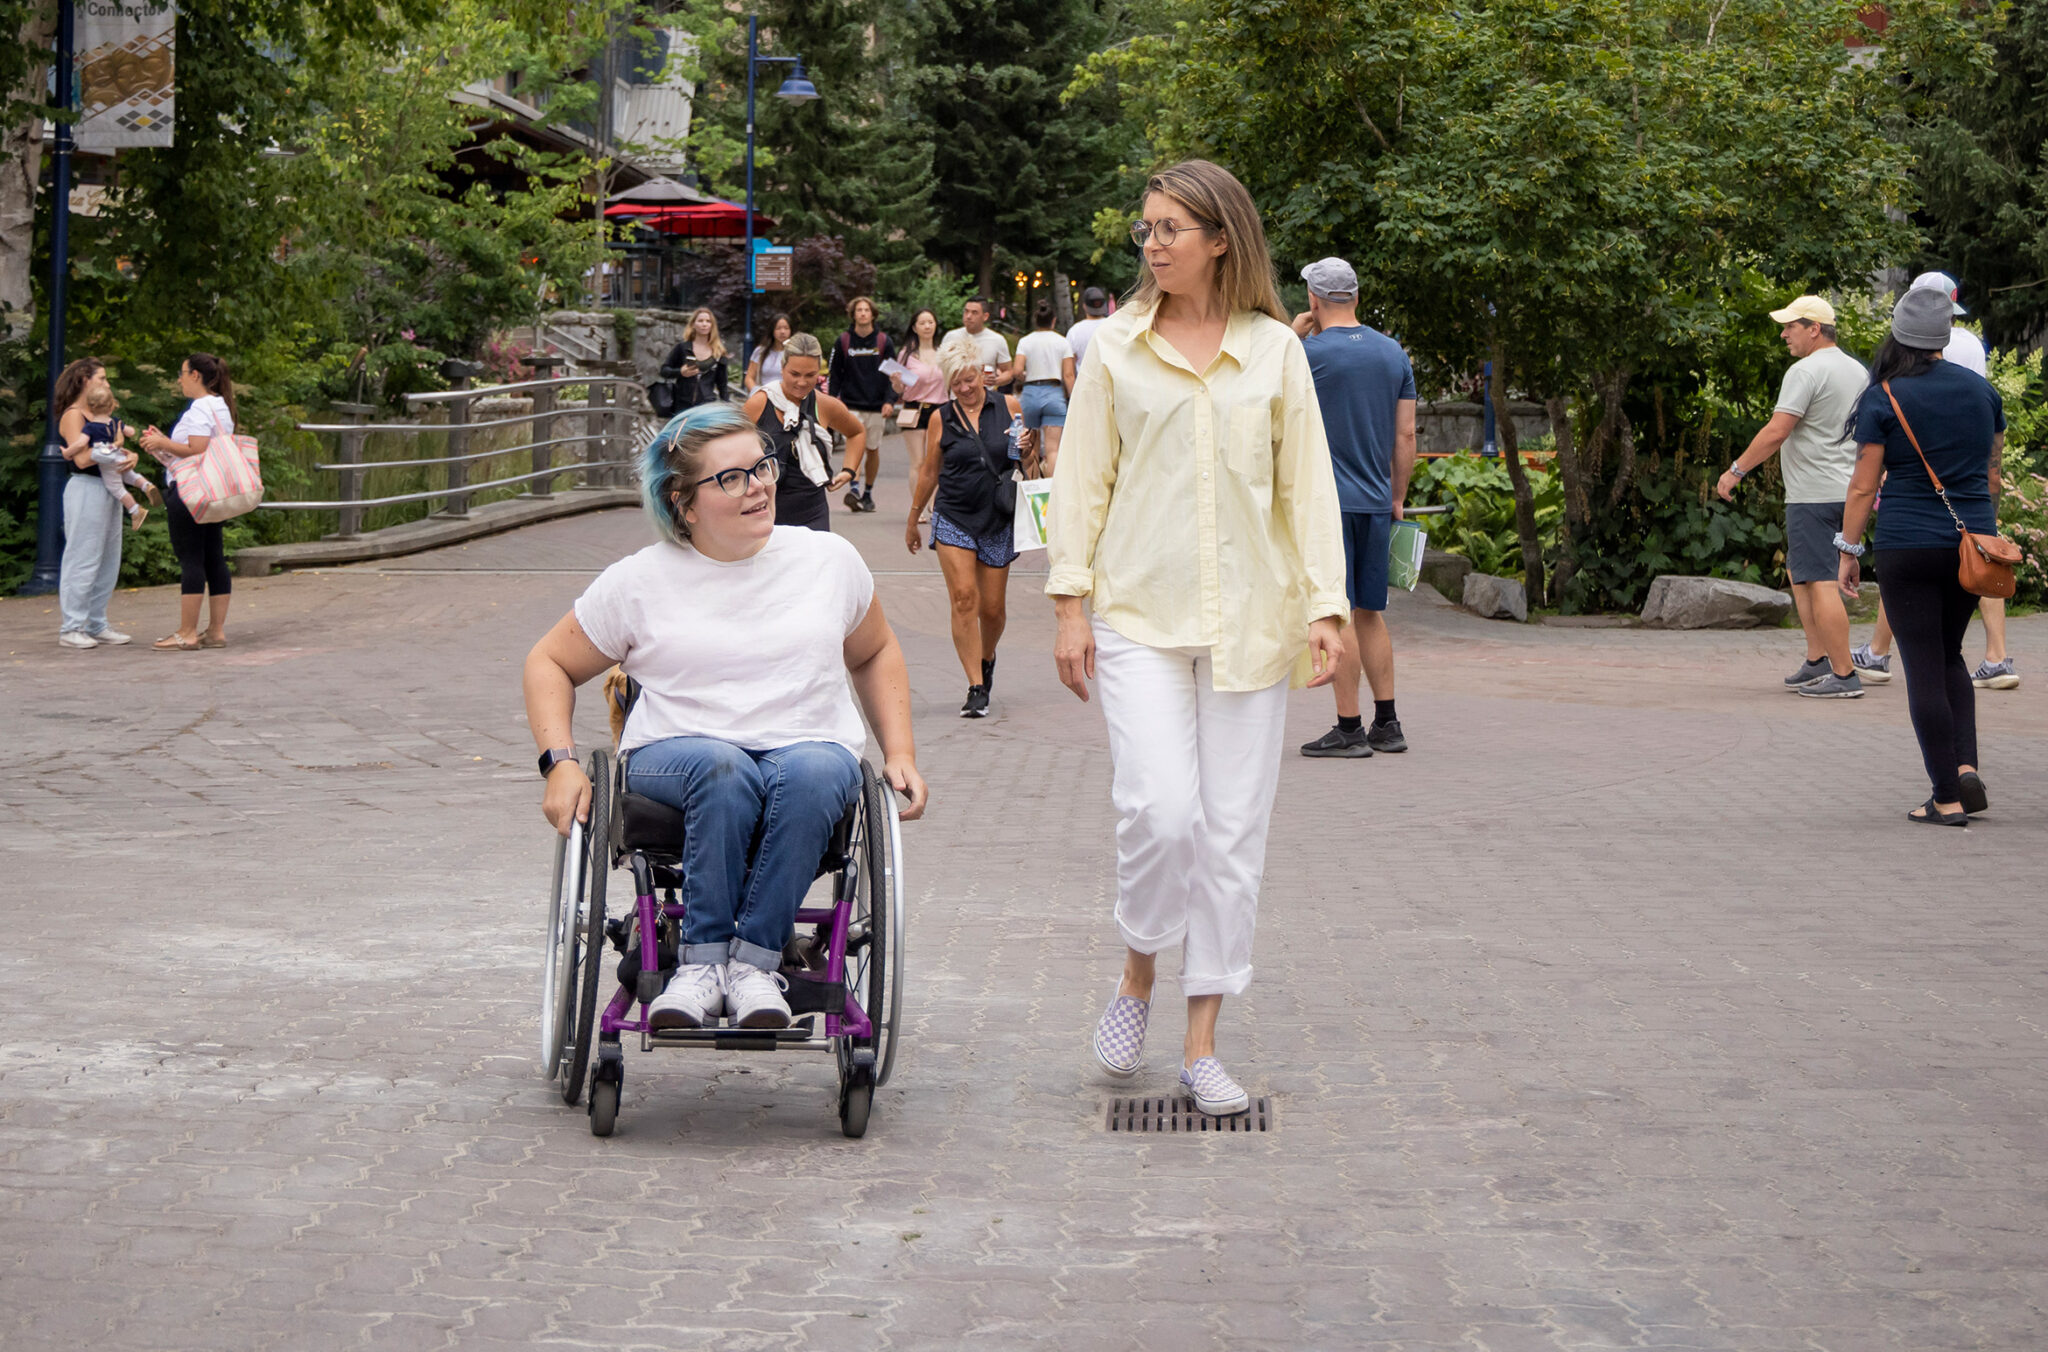 Two people enjoy the lively pedestrian Village Stroll in Whistler Village. The street is bustling with tourists and locals, surrounded by quaint shops and greenery.